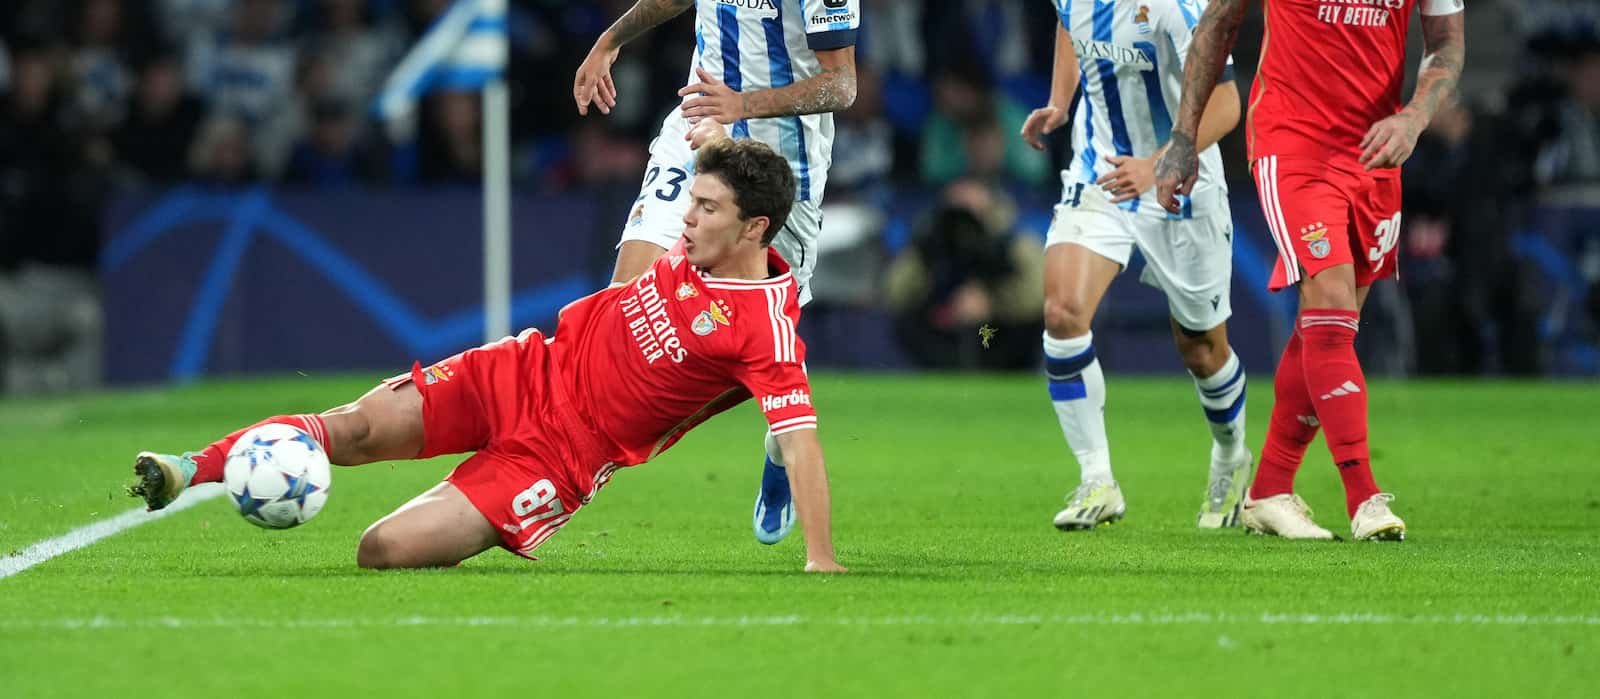 Joao Neves: Man United target refuses to confirm he’ll stay at Benfica in latest comments – Man United News And Transfer News